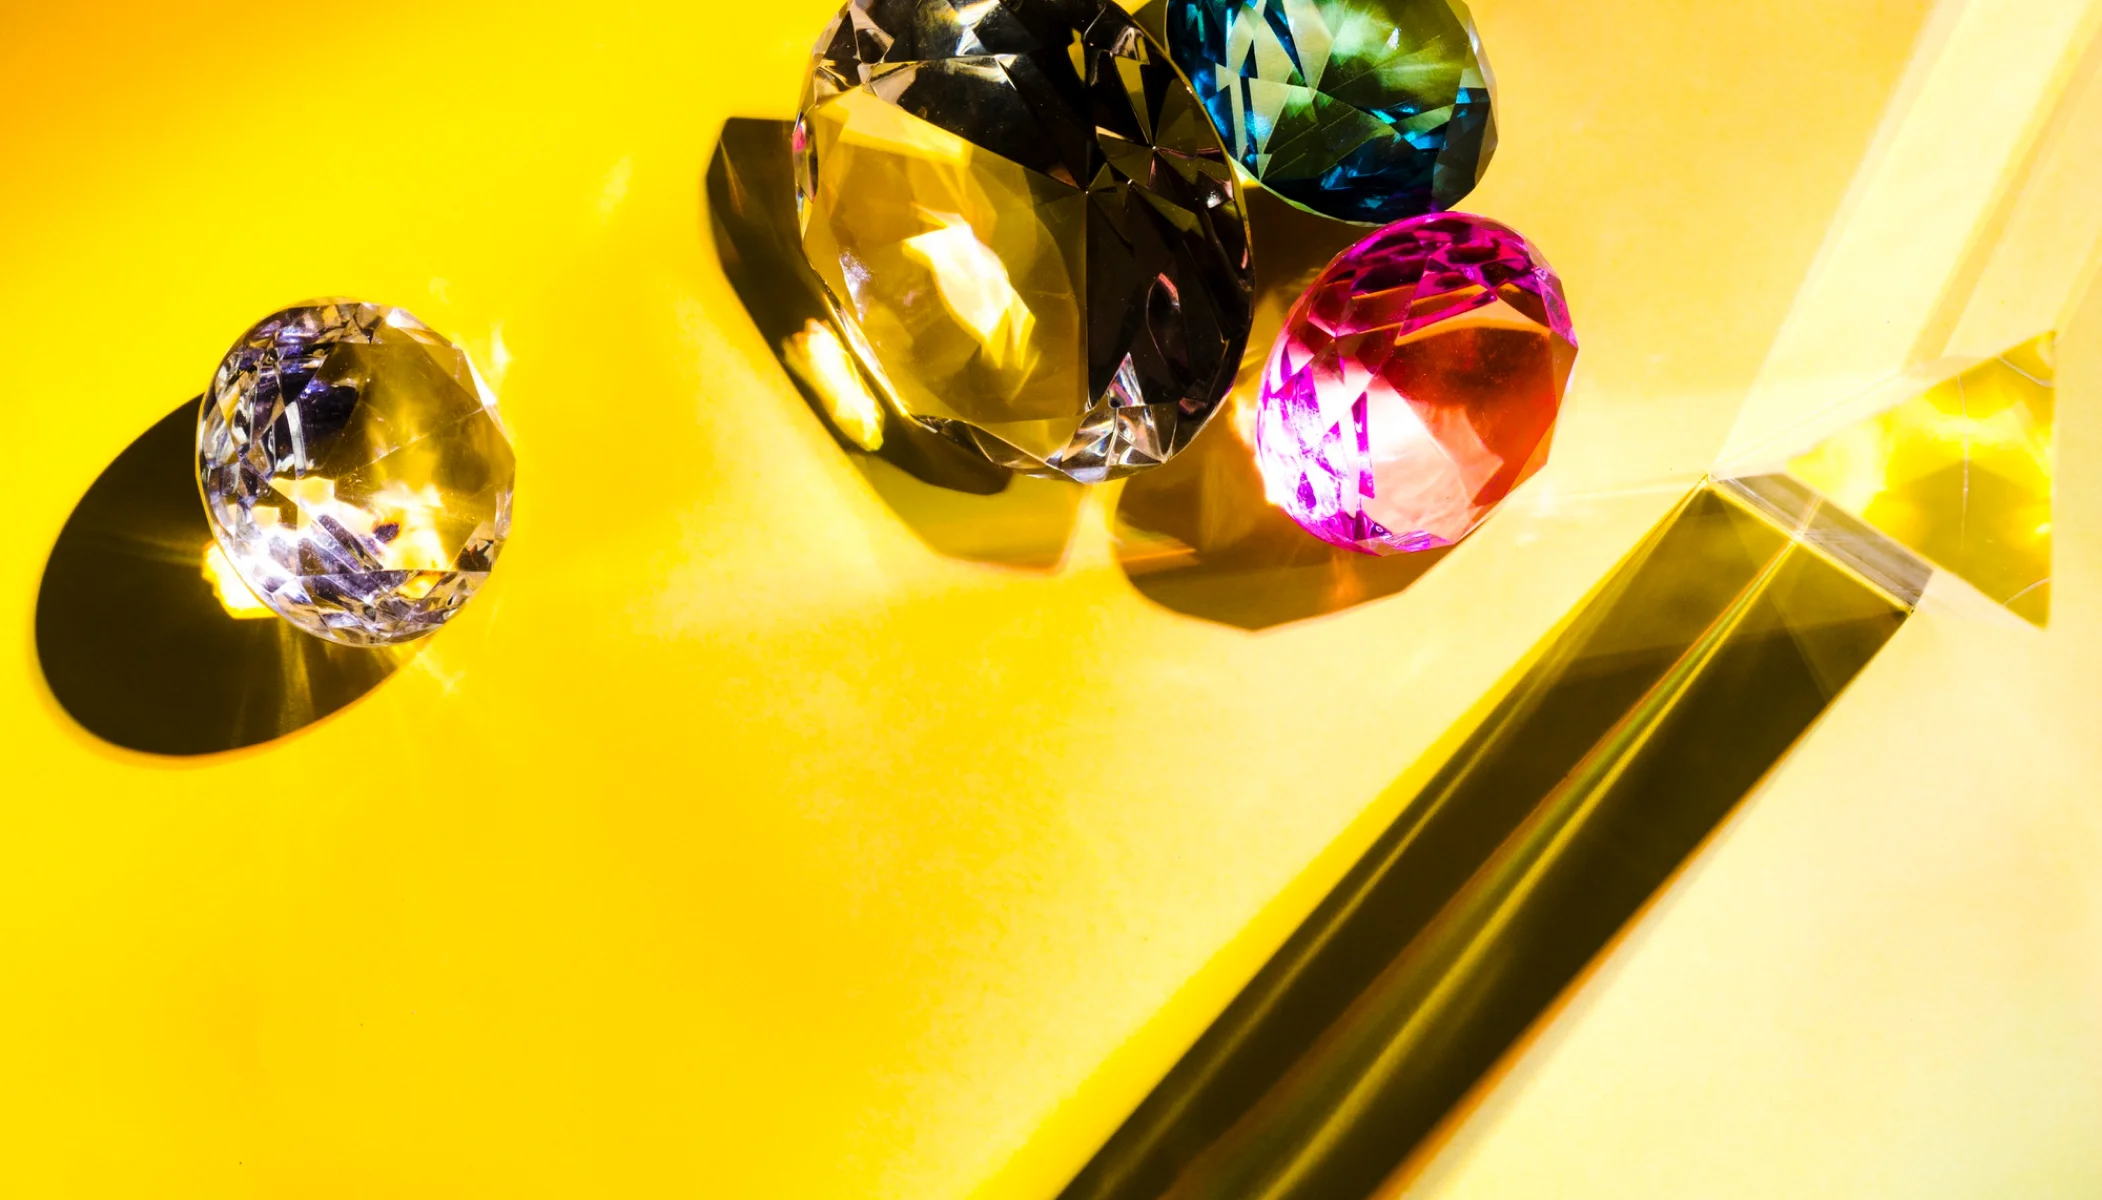 Tips for photographing gemstones and precious metals - photographing gems